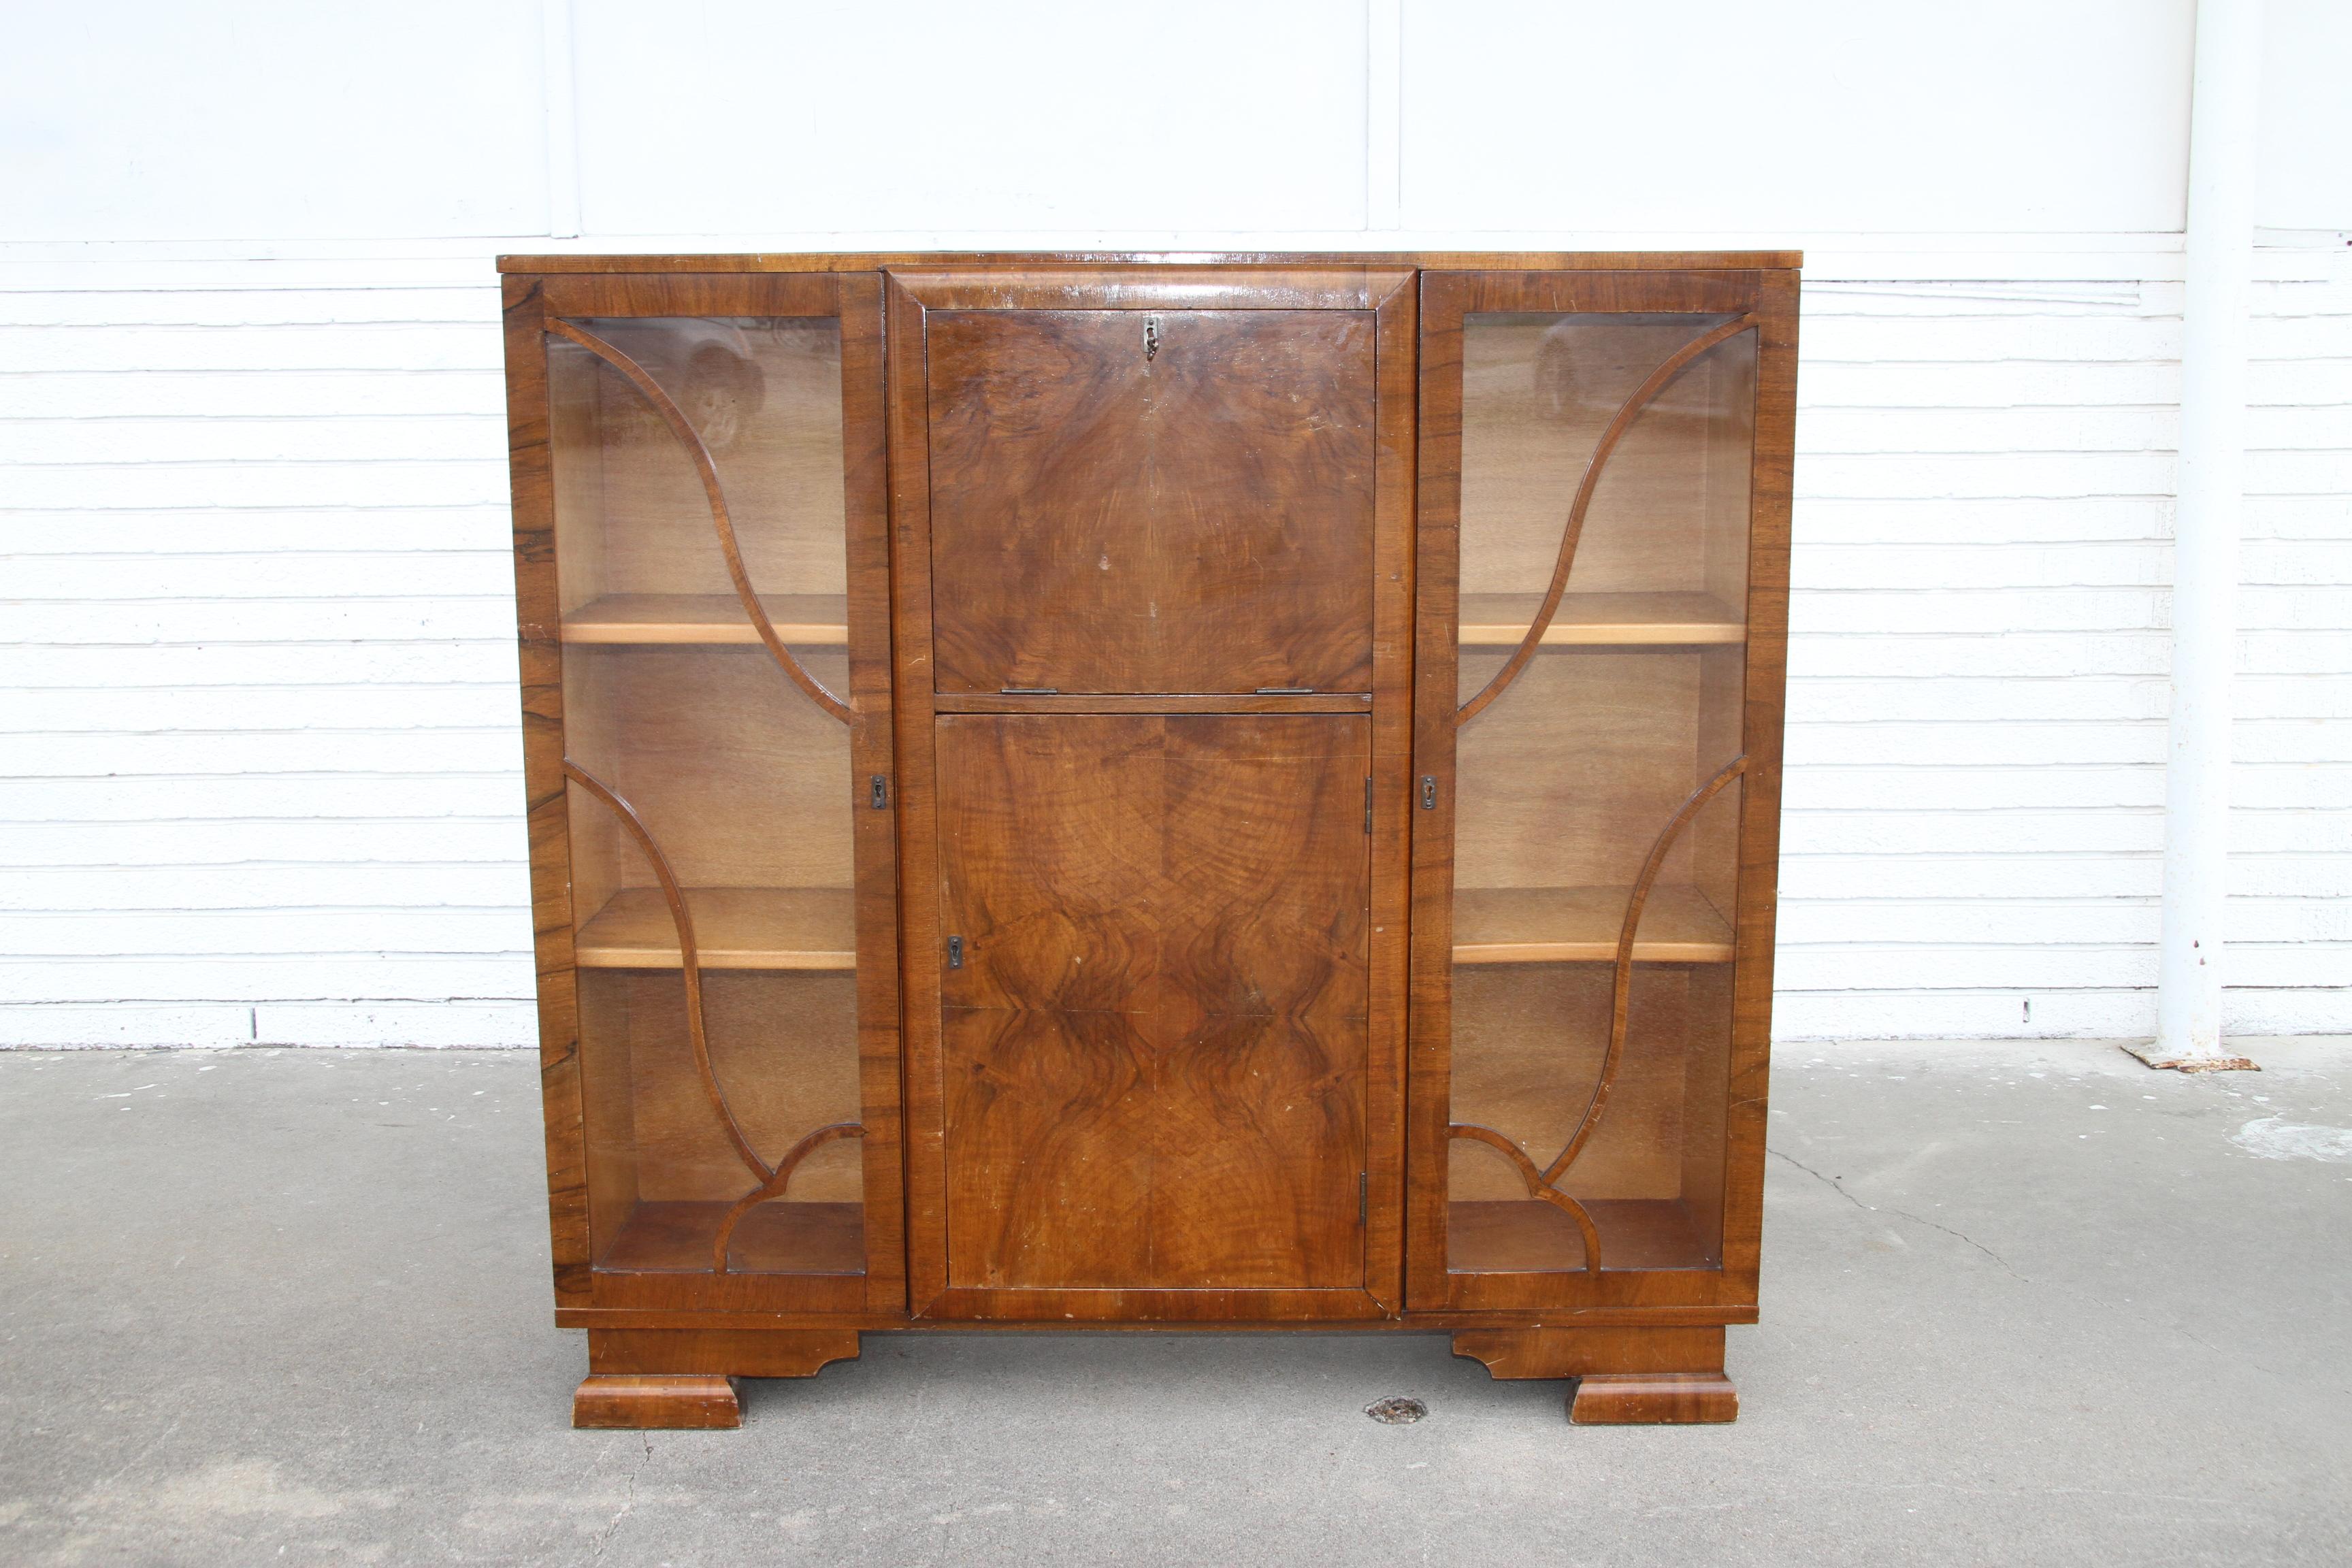 1930s Art Deco secretary cabinet.

Exquisite Art Deco display cabinet in walnut with glass front doors featuring fretwork design. The center features a drop down work surface secretary and pidgeon hole compartments. Includes lower cabinet for